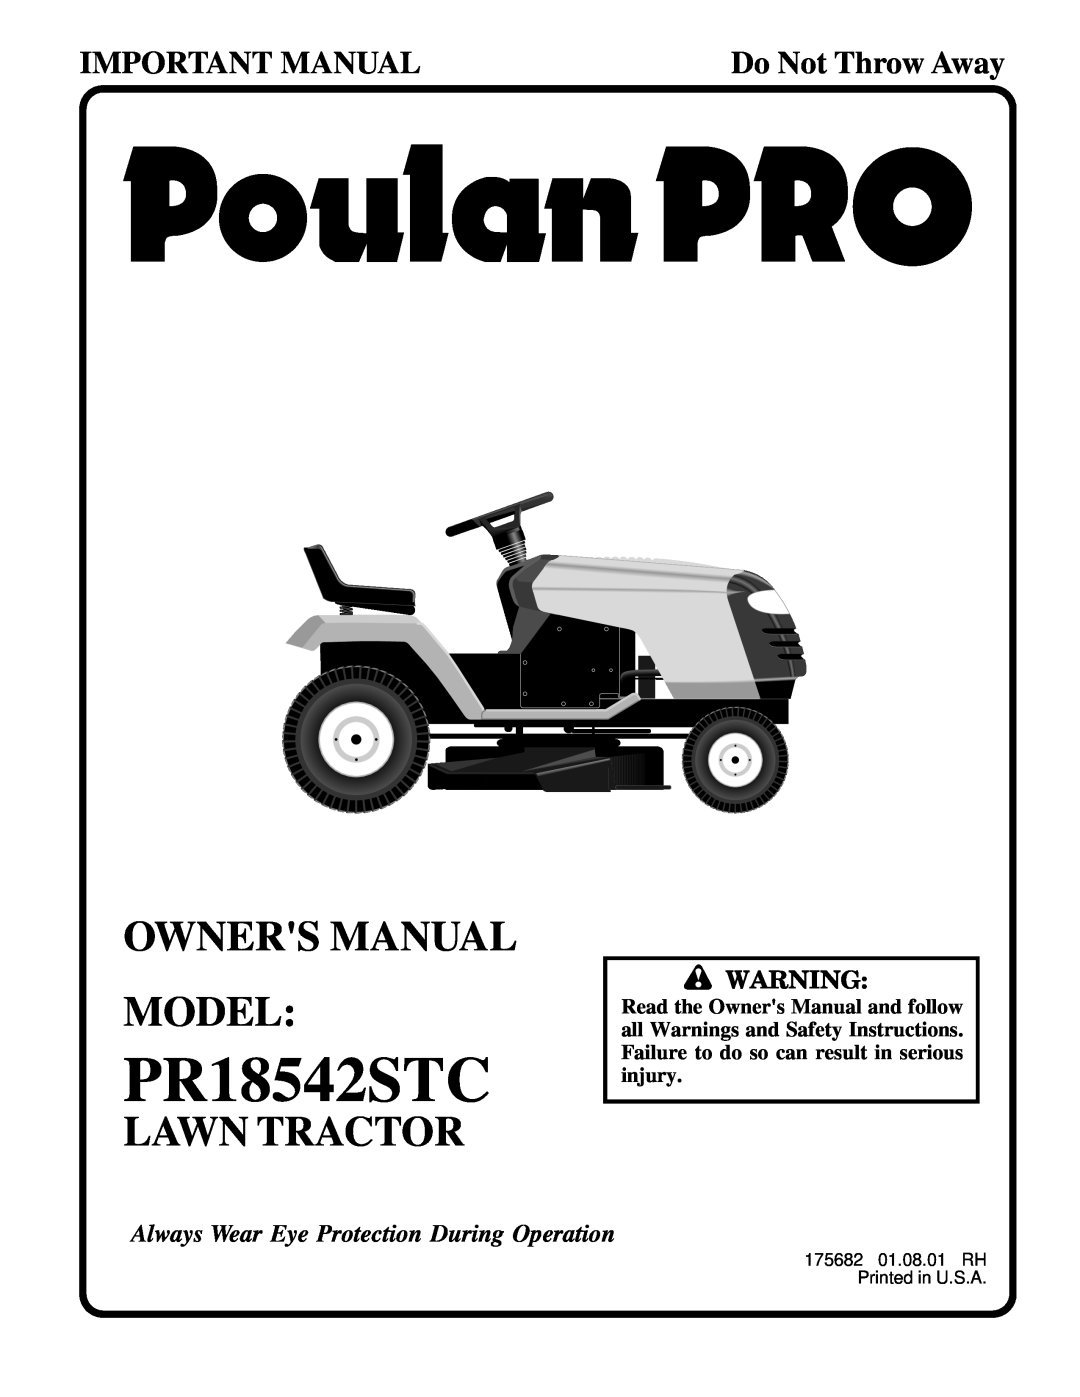 Poulan PR18542STC owner manual Lawn Tractor, Important Manual, Do Not Throw Away 